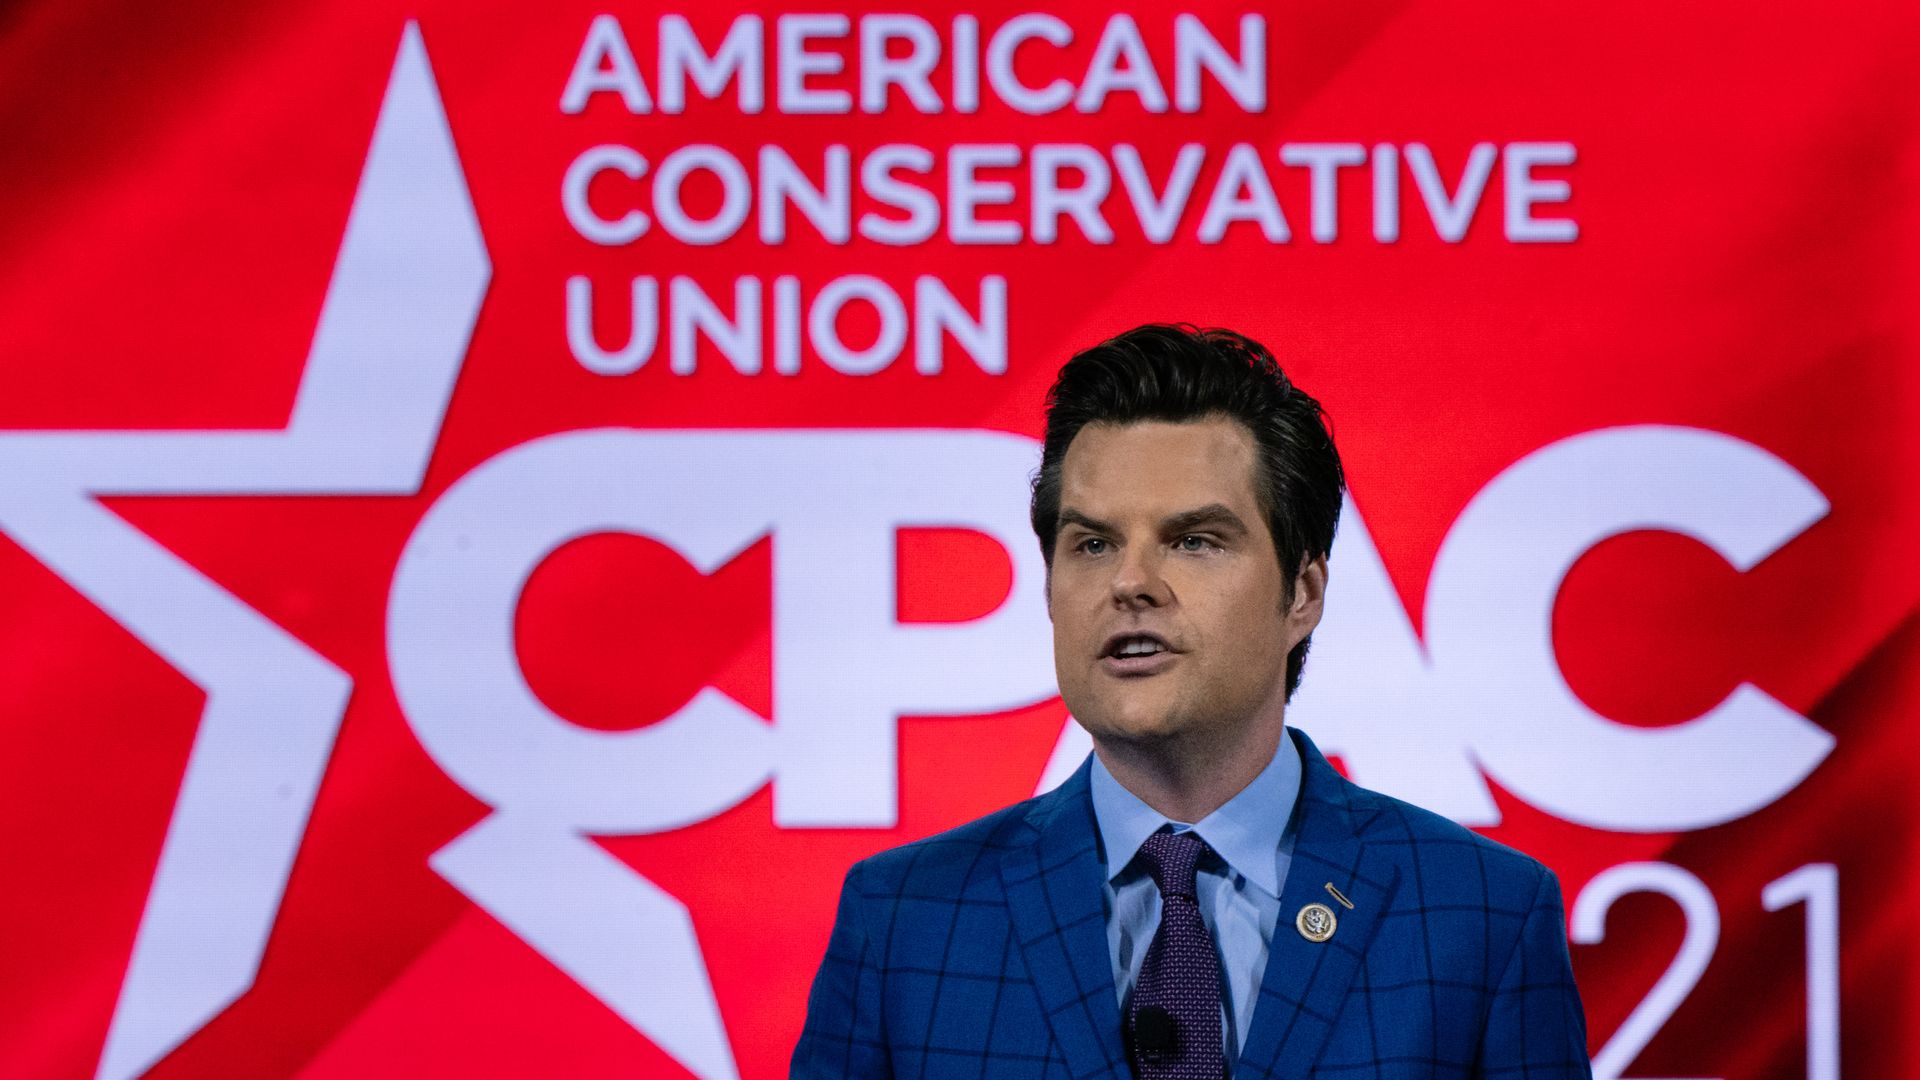 Representative Matt Gaetz, a Republican from Florida, speaks during the Conservative Political Action Conference (CPAC) 